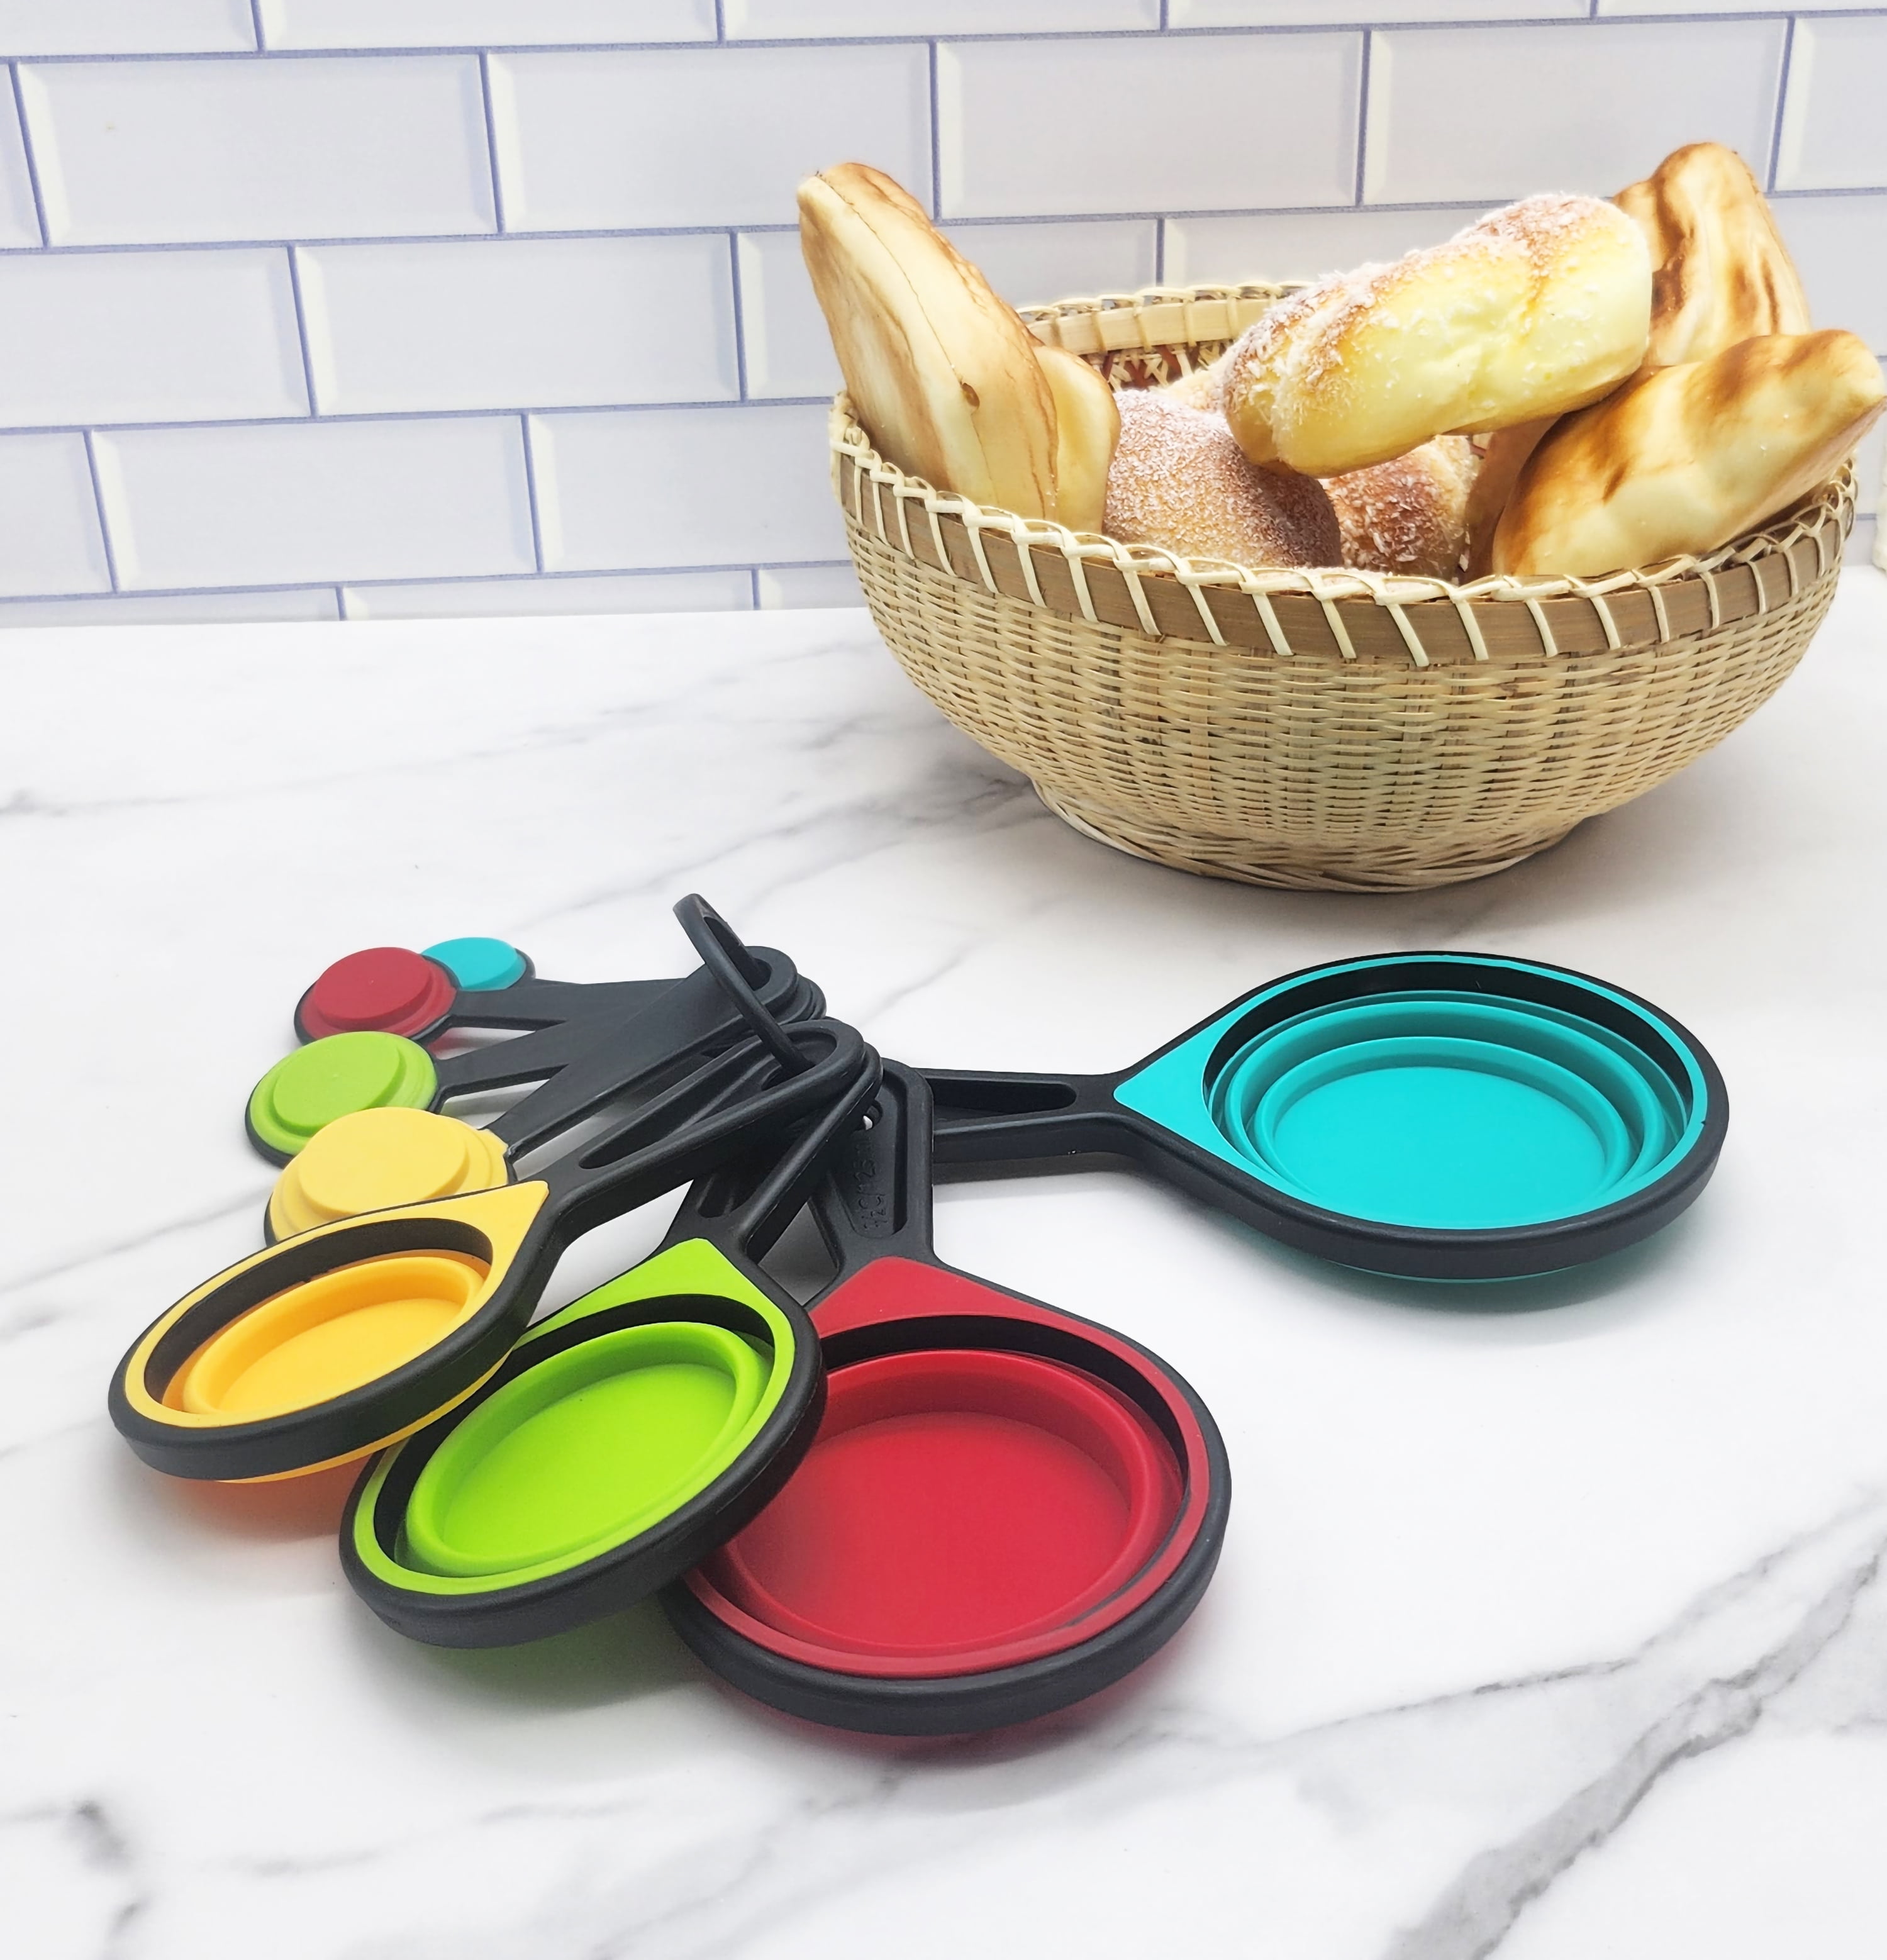 8 Piece Collapsible Measuring Cups and Spoons Set by BariatricPal